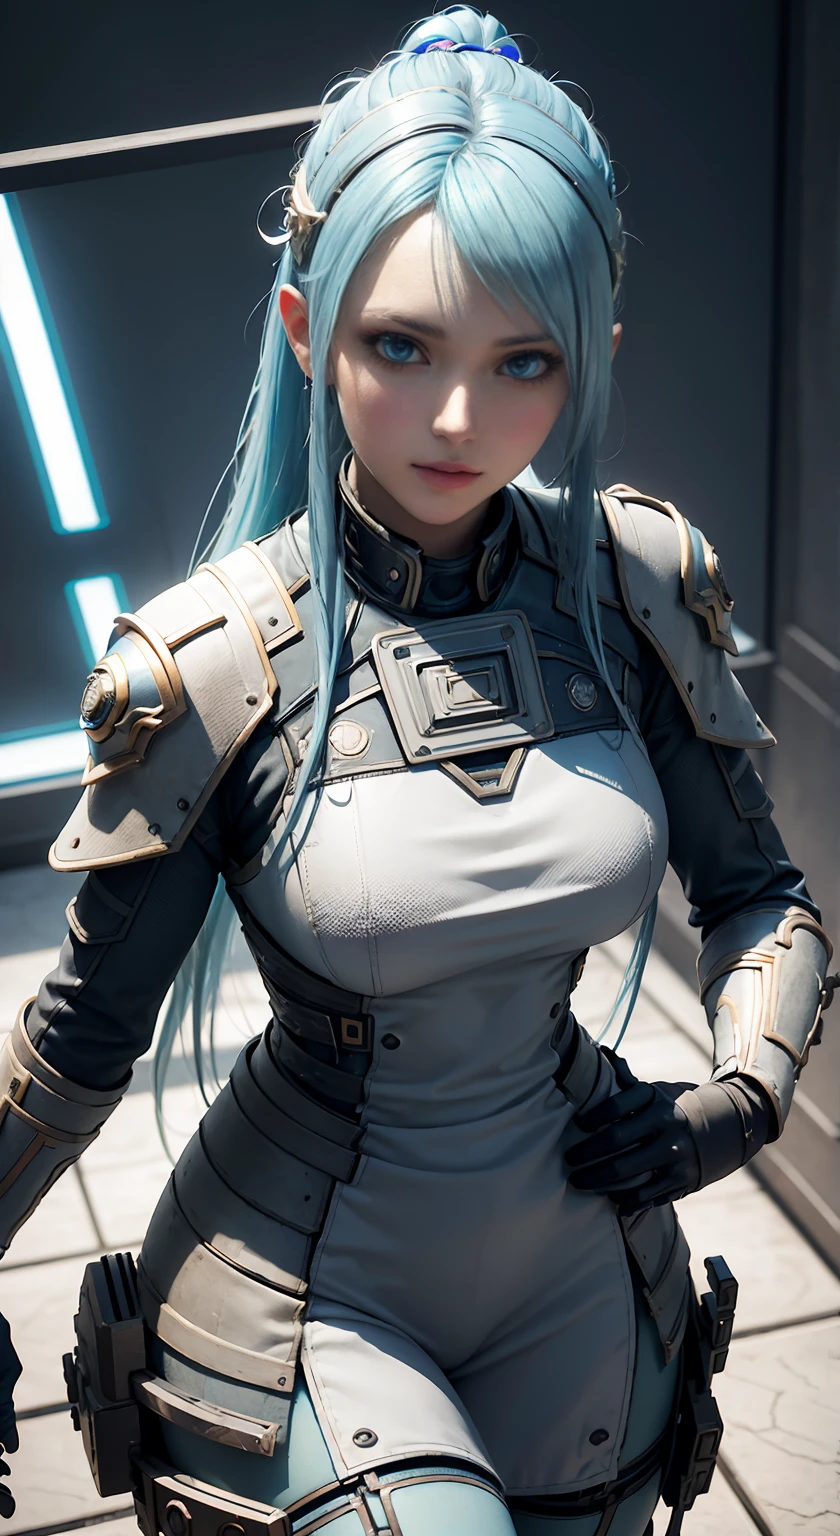 ((Best quality)), ((masterpiece)), (detailed:1.3), close-up, 3D, an image of a beautiful cyberpunk female, straight long hair, Ice Blue hair, beautiful blue eyes, HDR (High Dynamic Range),Ray Tracing,NVIDIA RTX,Super-Resolution,Unreal 5,Subsurface scattering,PBR Texturing,Post-processing,Anisotropic Filtering,Depth-of-field,Maximum clarity and sharpness,Multi-layered textures,Albedo and Specular maps,Surface shading,Accurate simulation of light-material interaction,Perfect proportions,Octane Render,Two-tone lighting,Wide aperture,Low ISO,White balance,Rule of thirds,8K RAW,